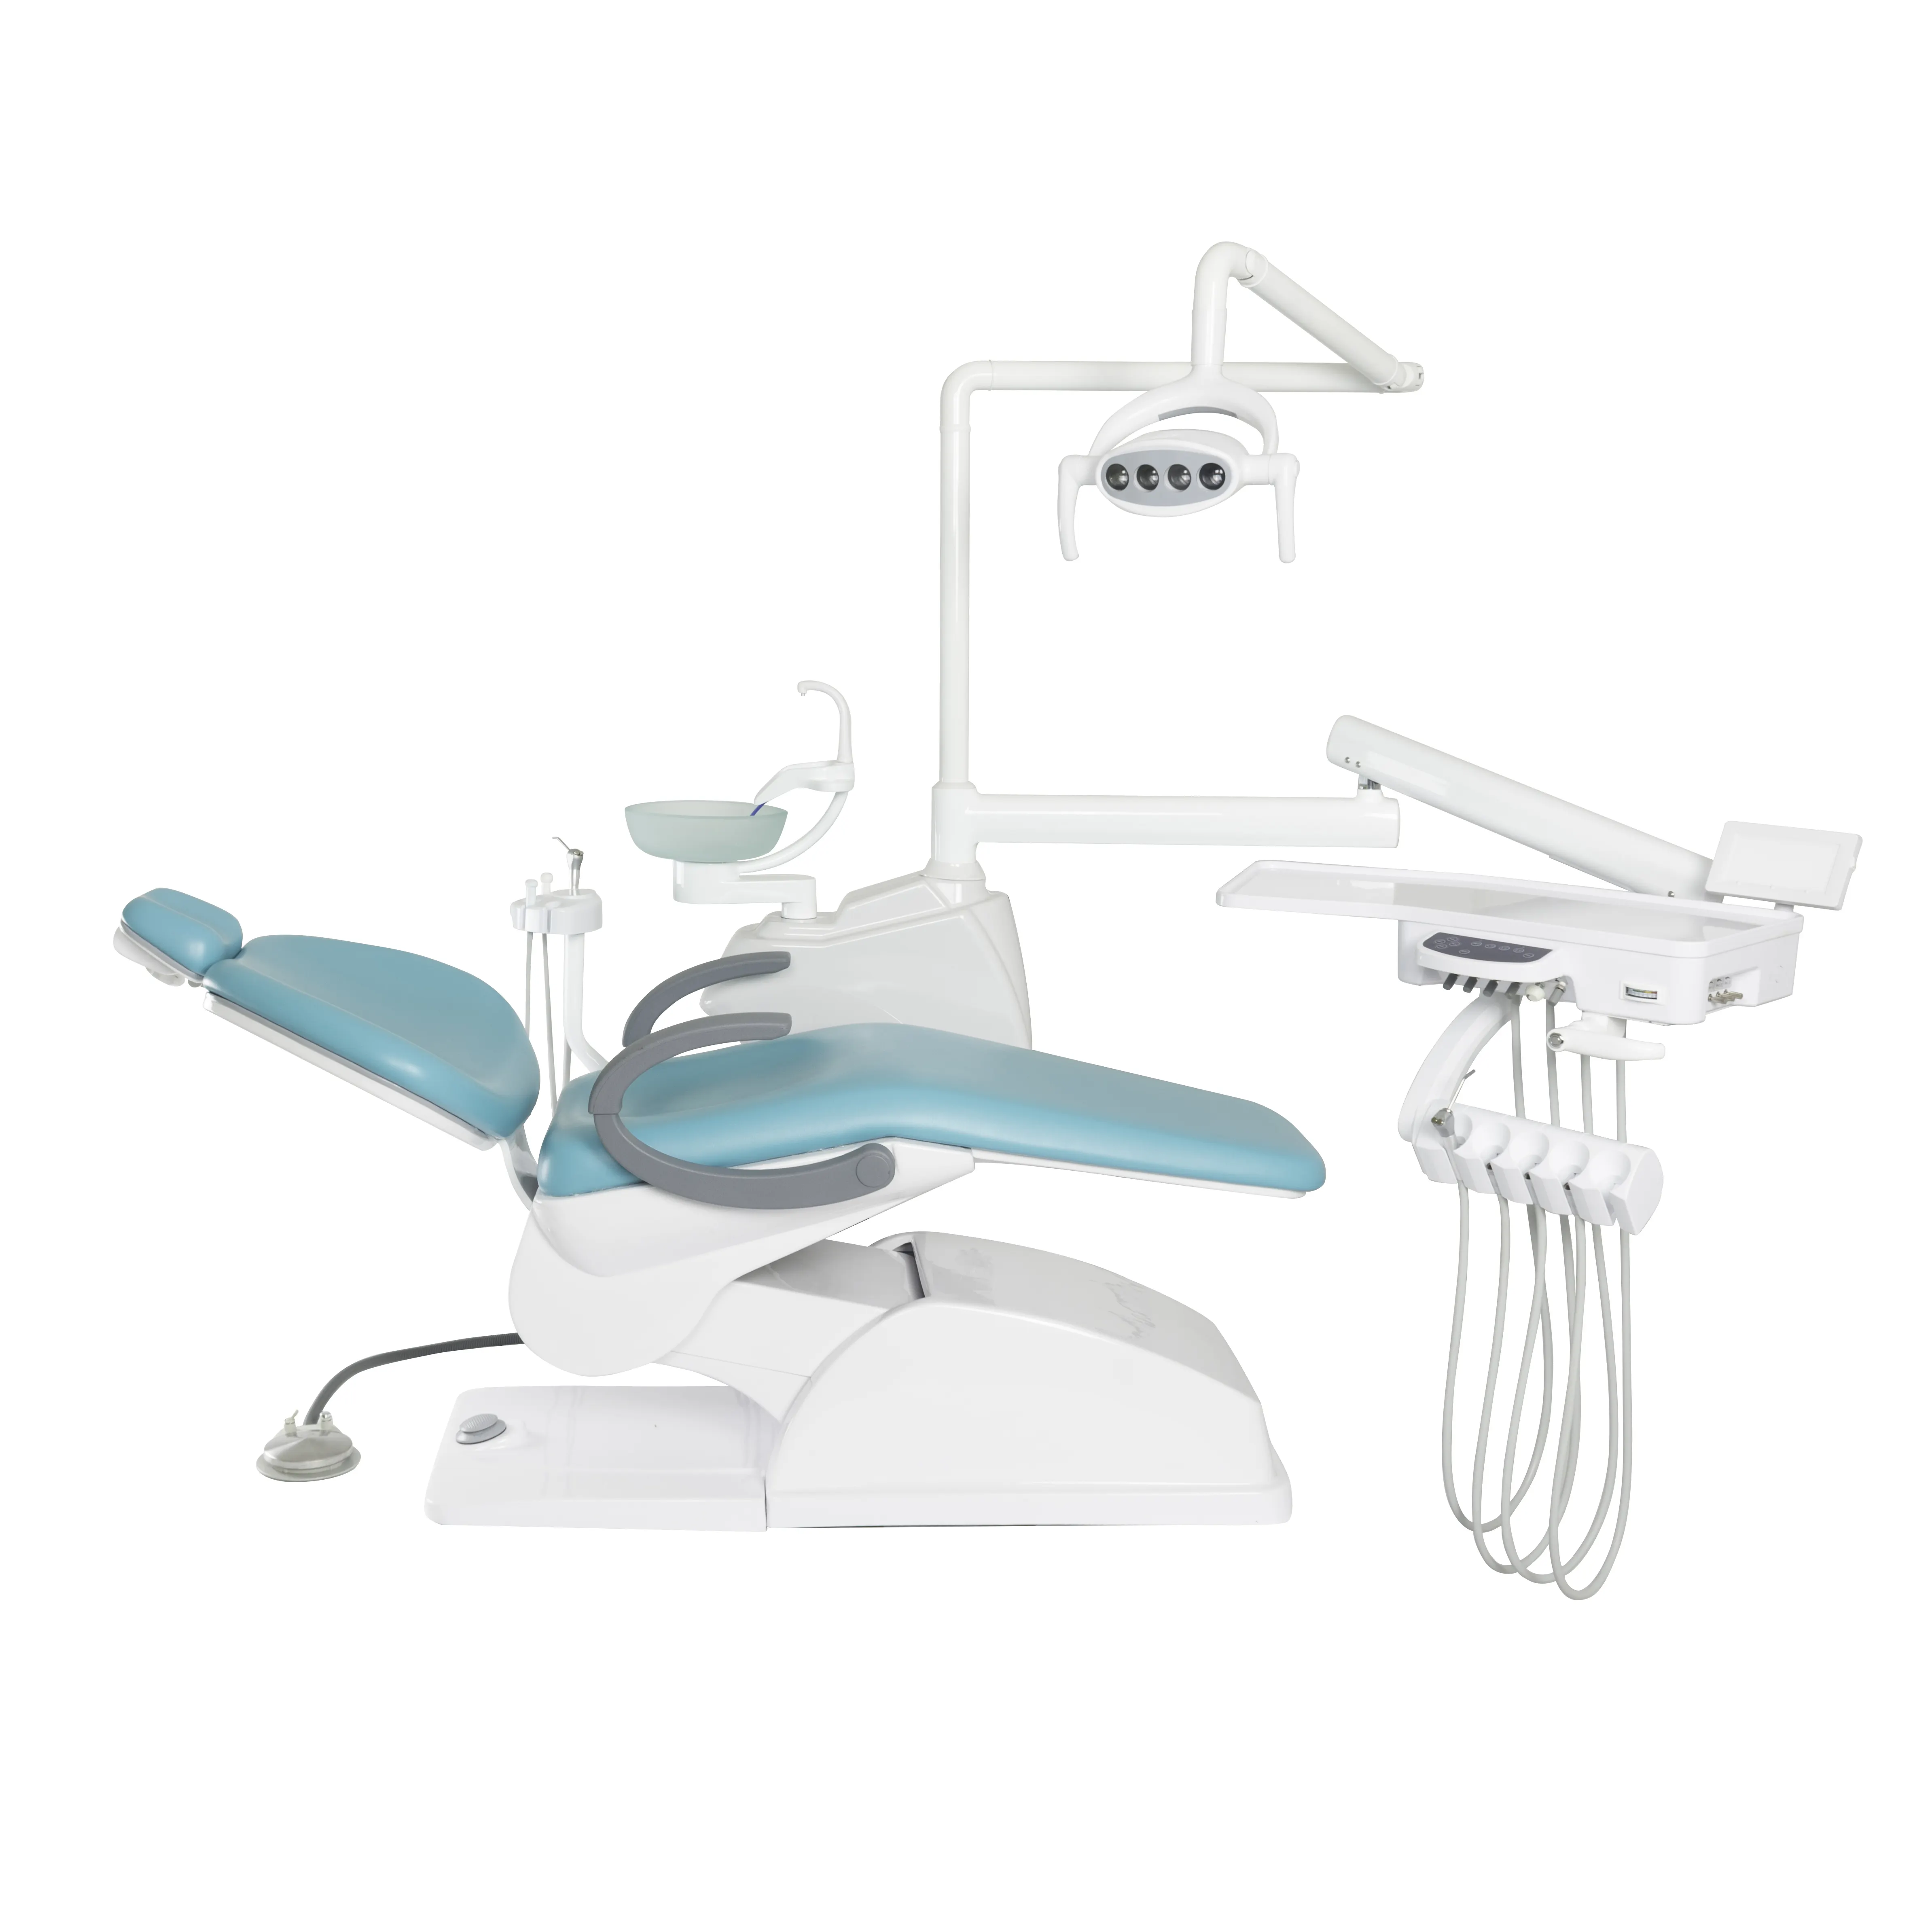 LK-A11Pro Other Dental Equipments Cheap Dental Unit Spare Parts Chair